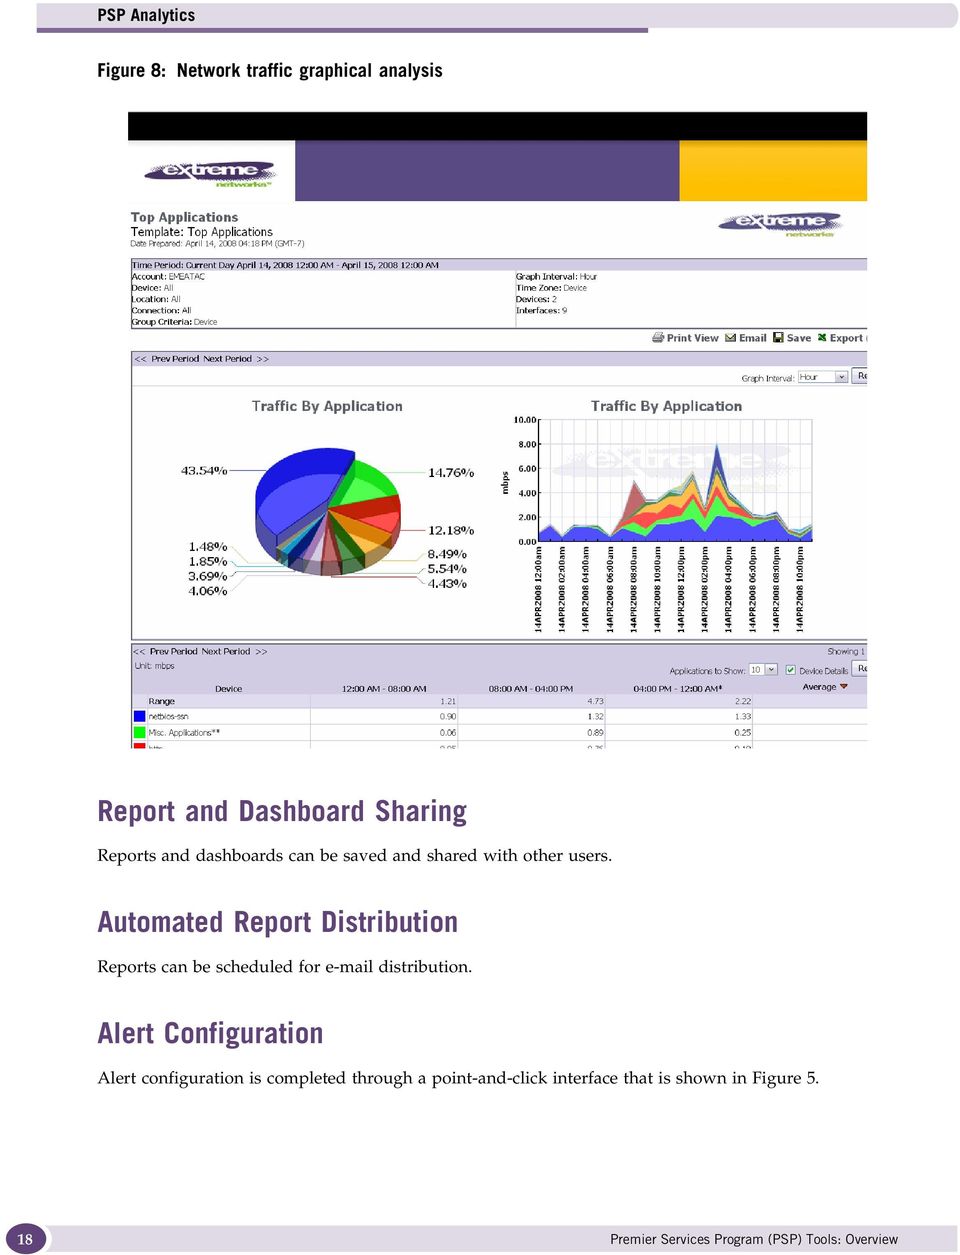 Automated Report Distribution Reports can be scheduled for e-mail distribution.